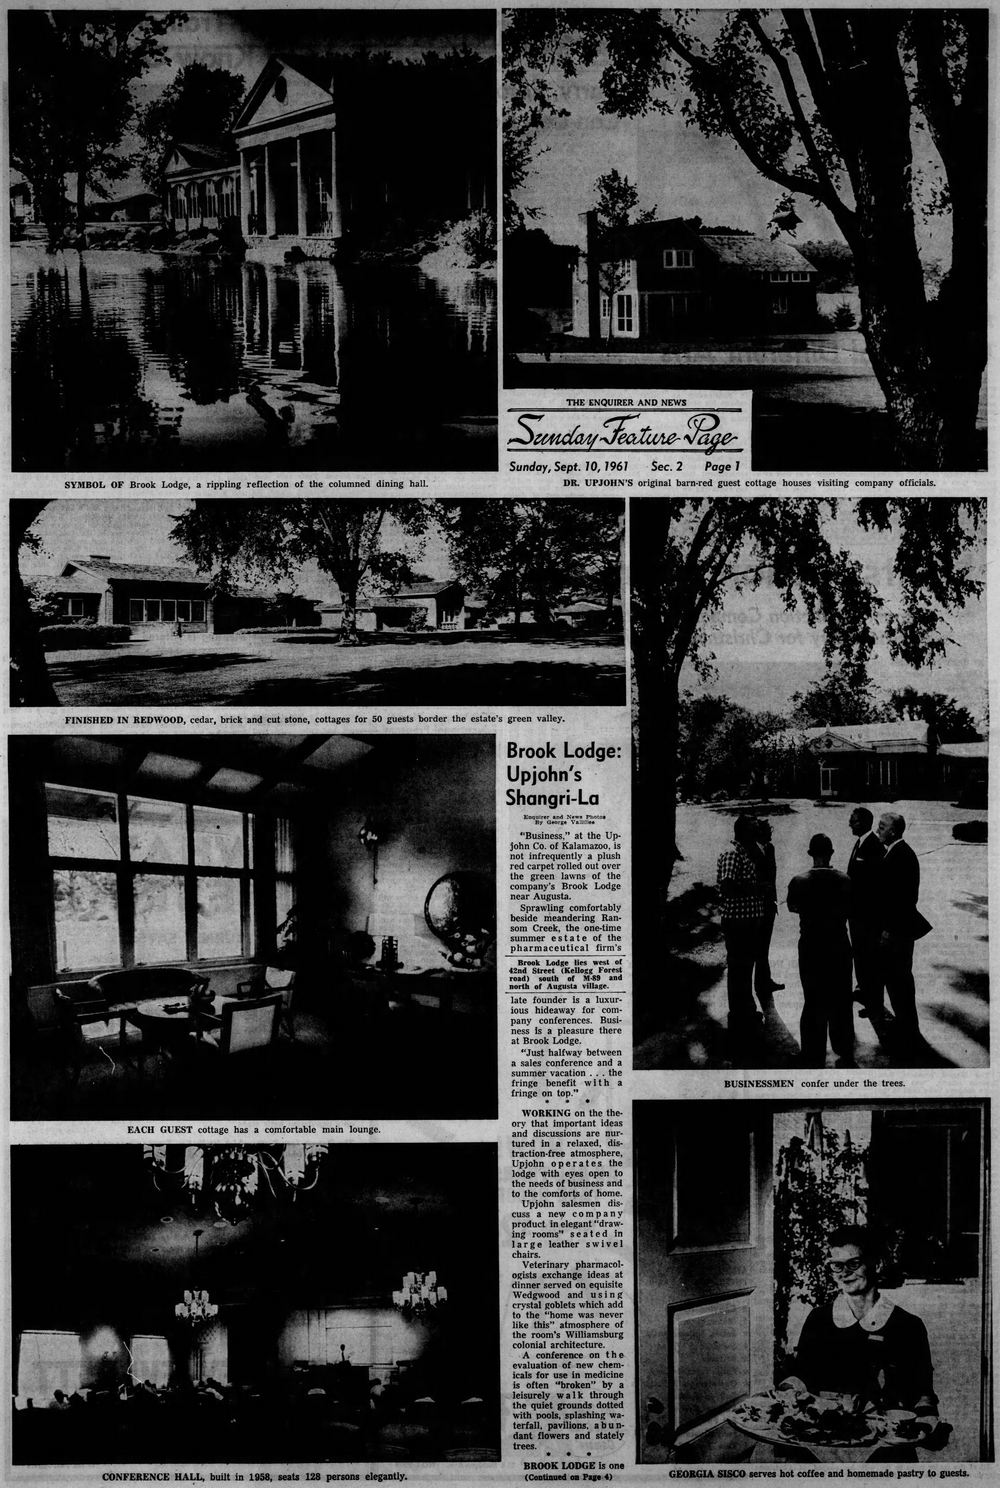 Brook Lodge - Sept 1961 Article (newer photo)